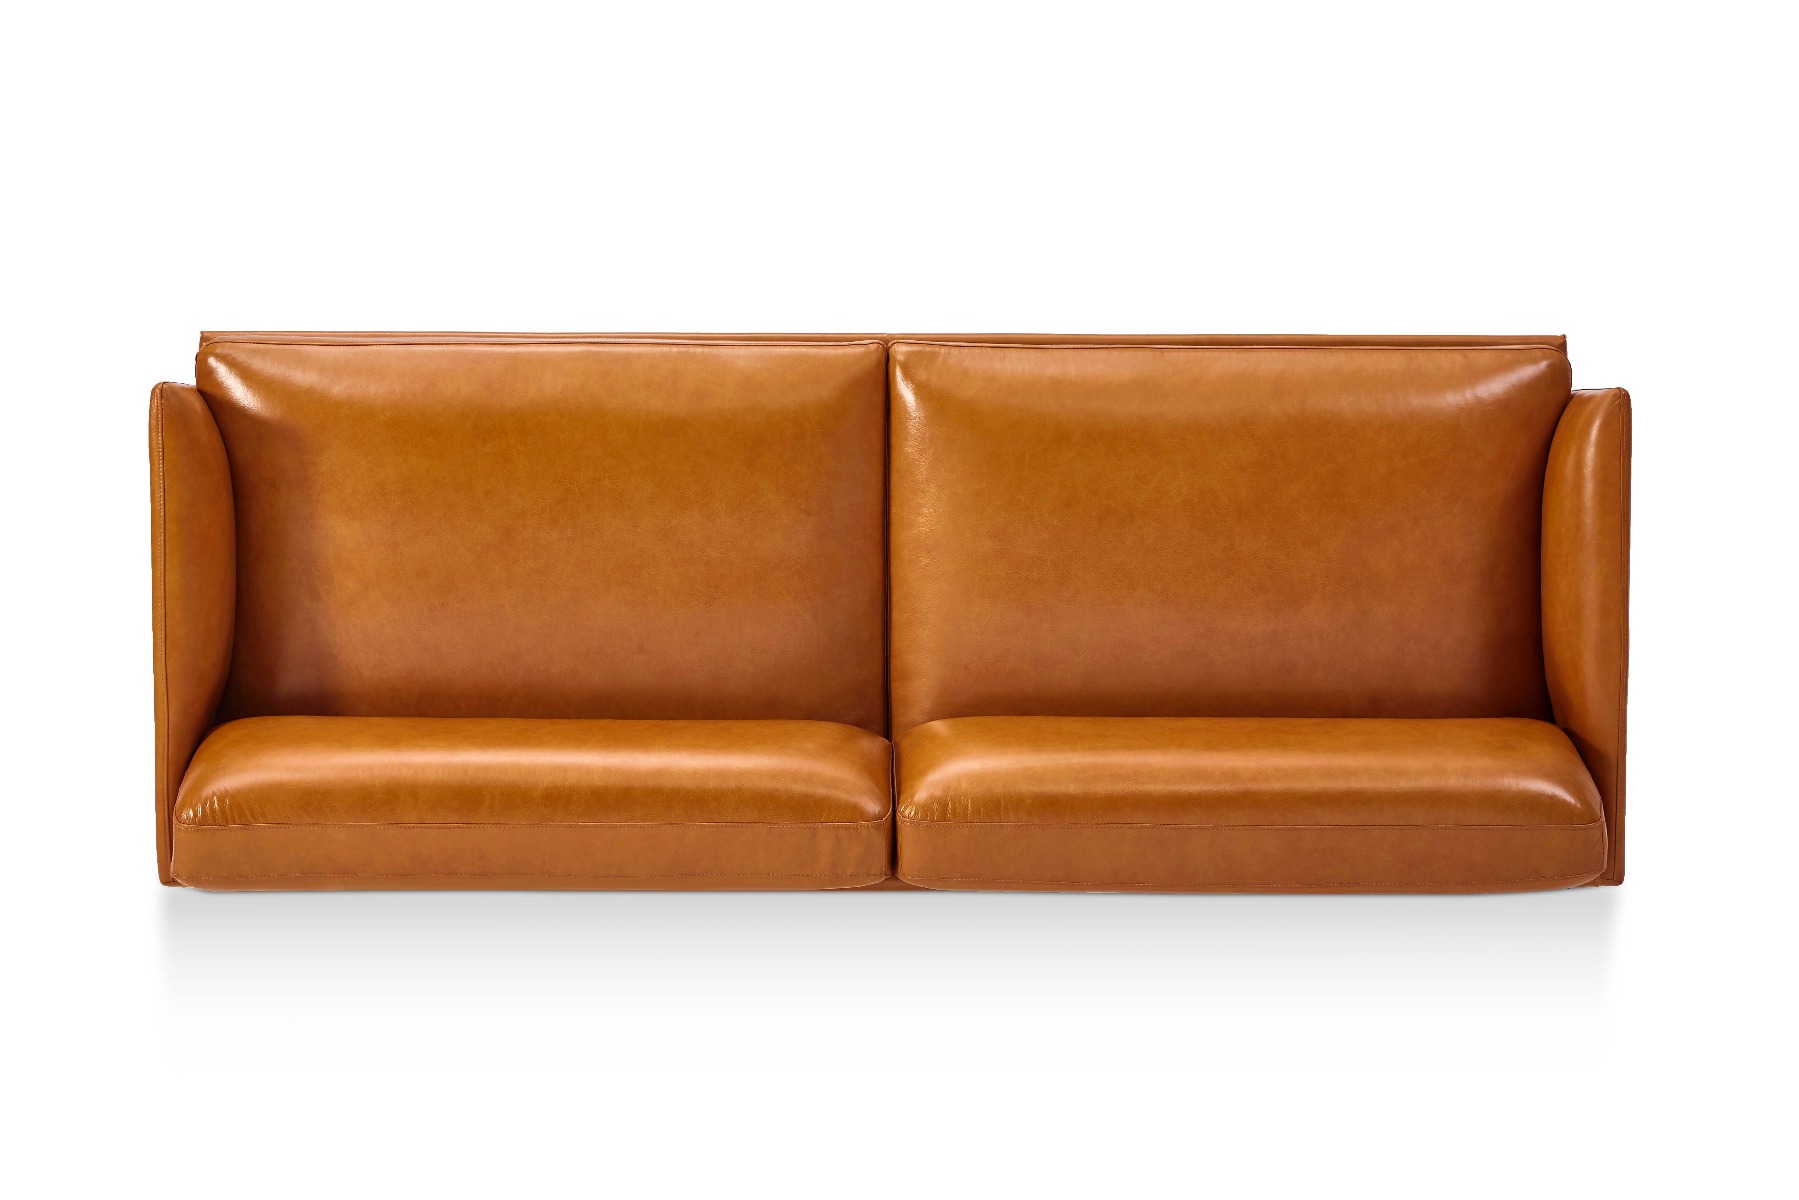 Twin-cushion seats have ample stuffing of high-density foam.